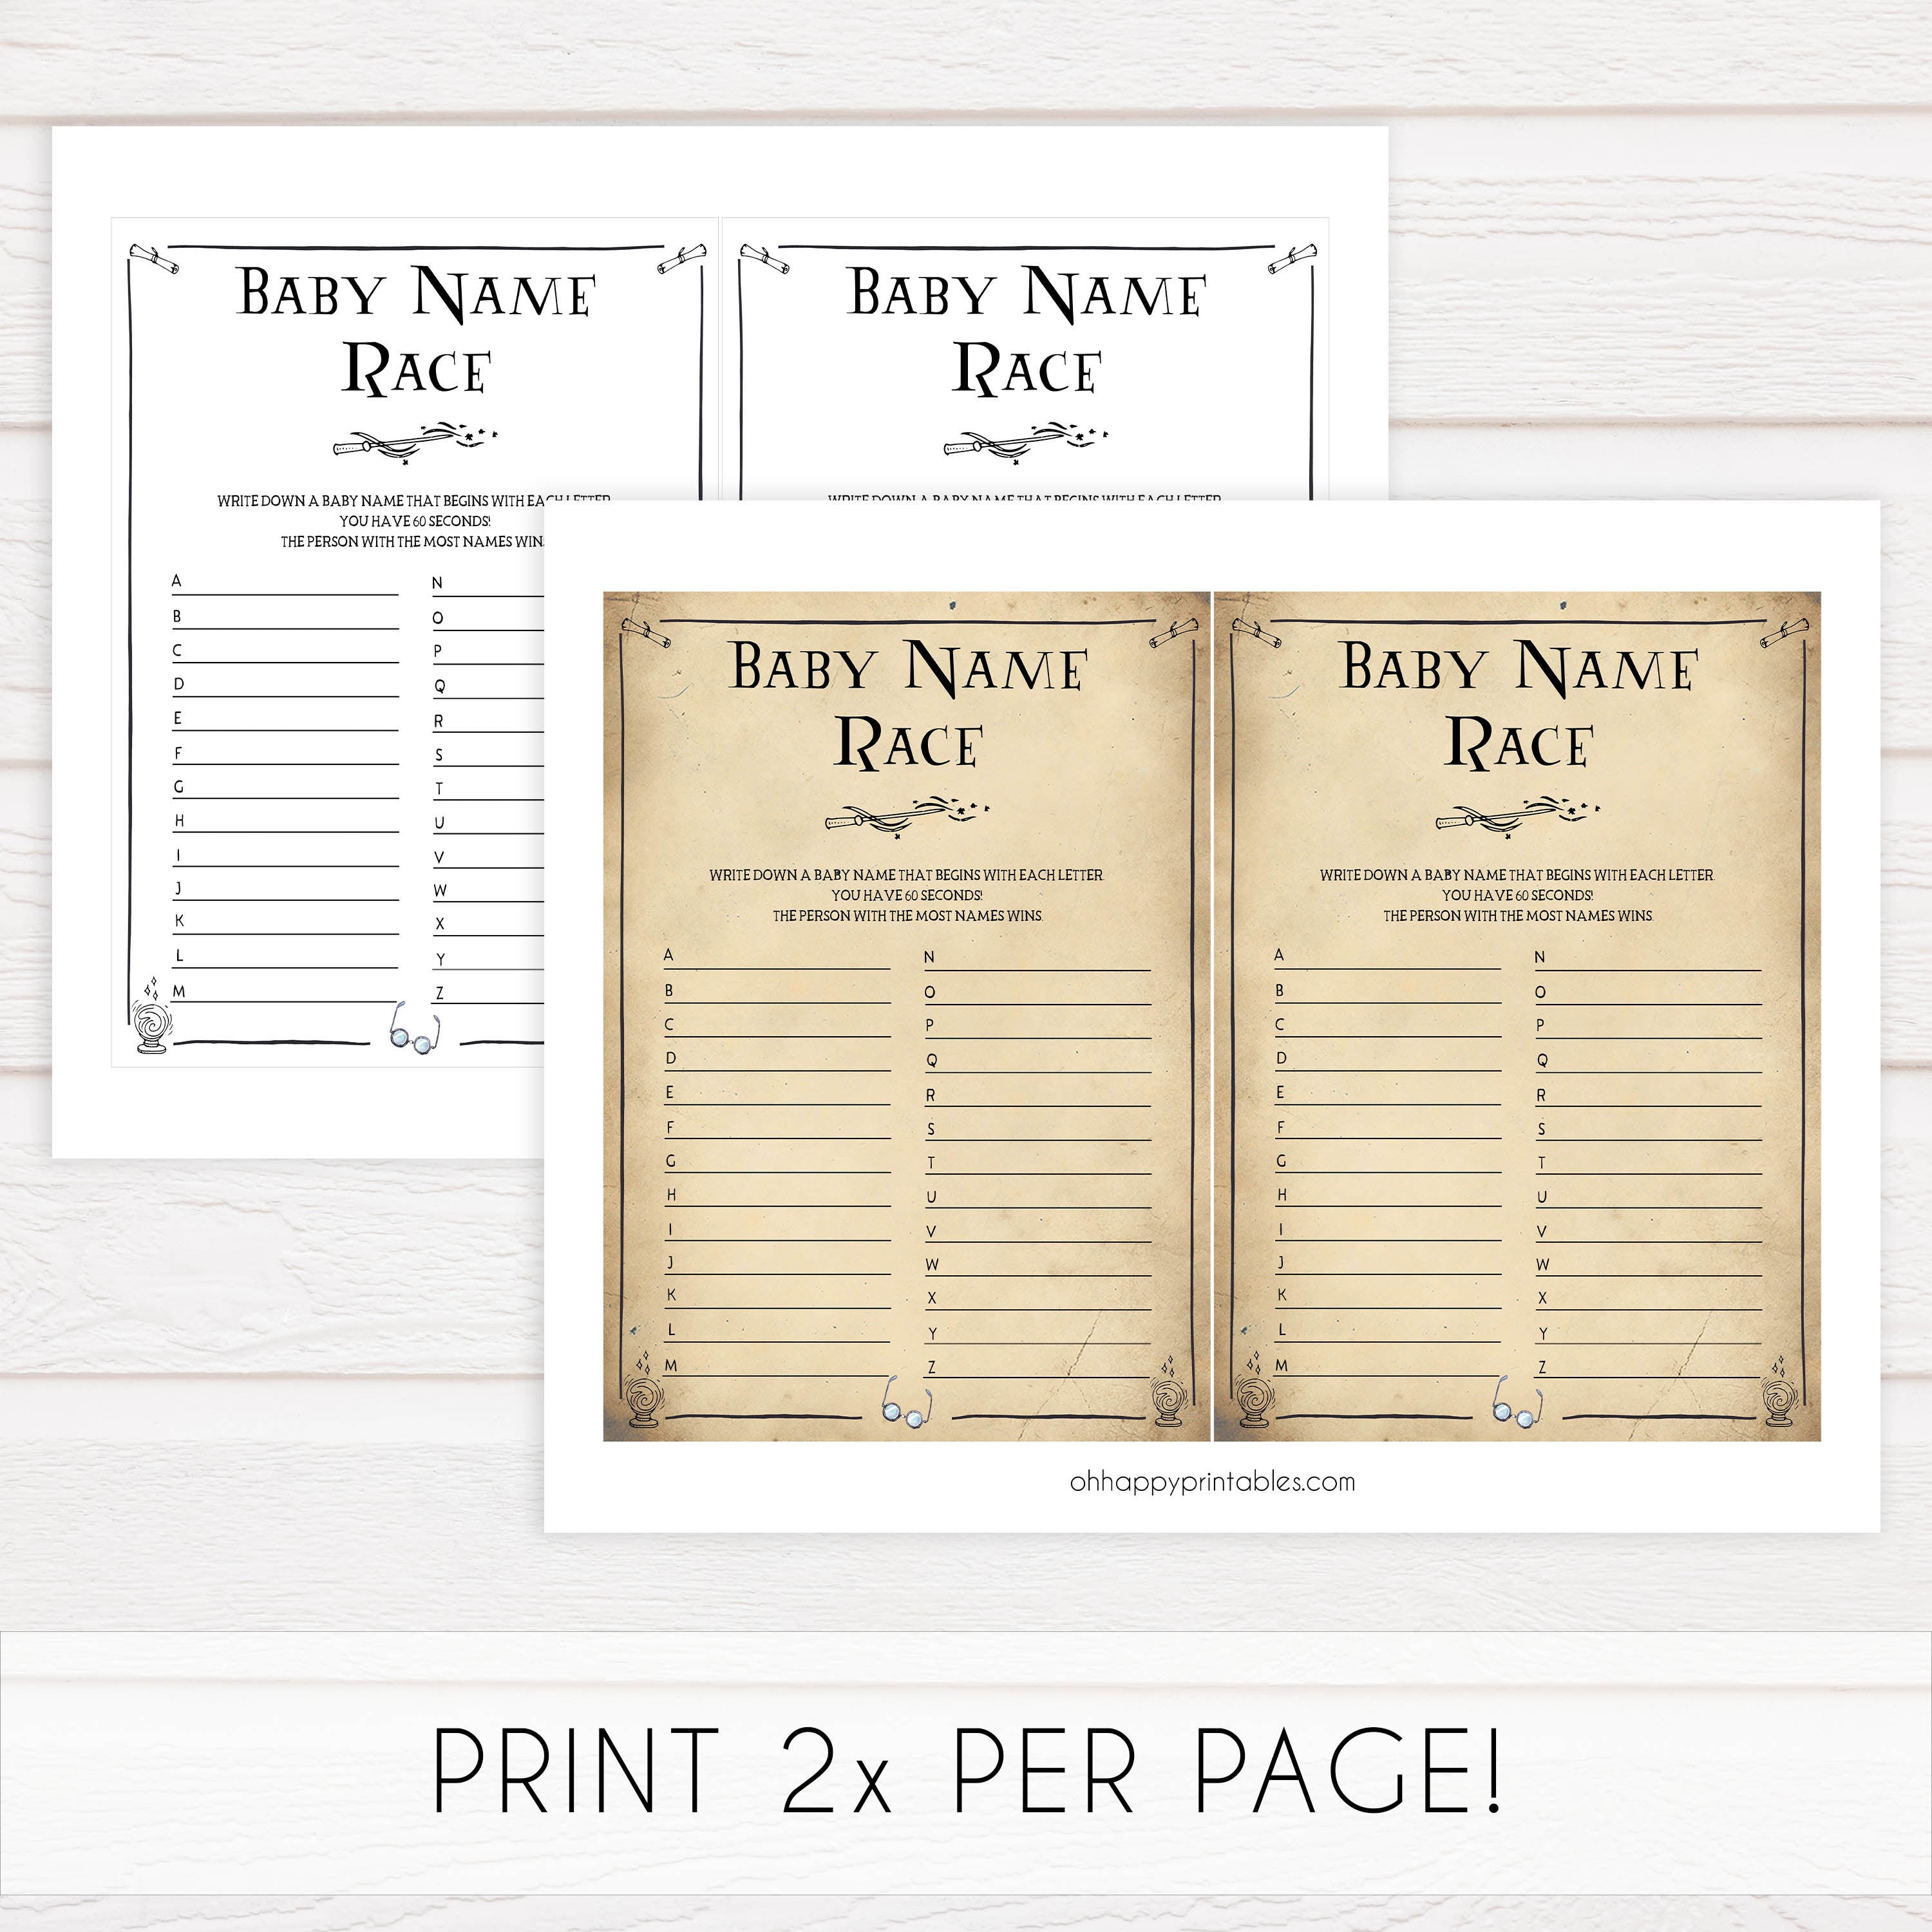 Baby Name Race Game, Wizard baby shower games, printable baby shower games, Harry Potter baby games, Harry Potter baby shower, fun baby shower games,  fun baby ideas